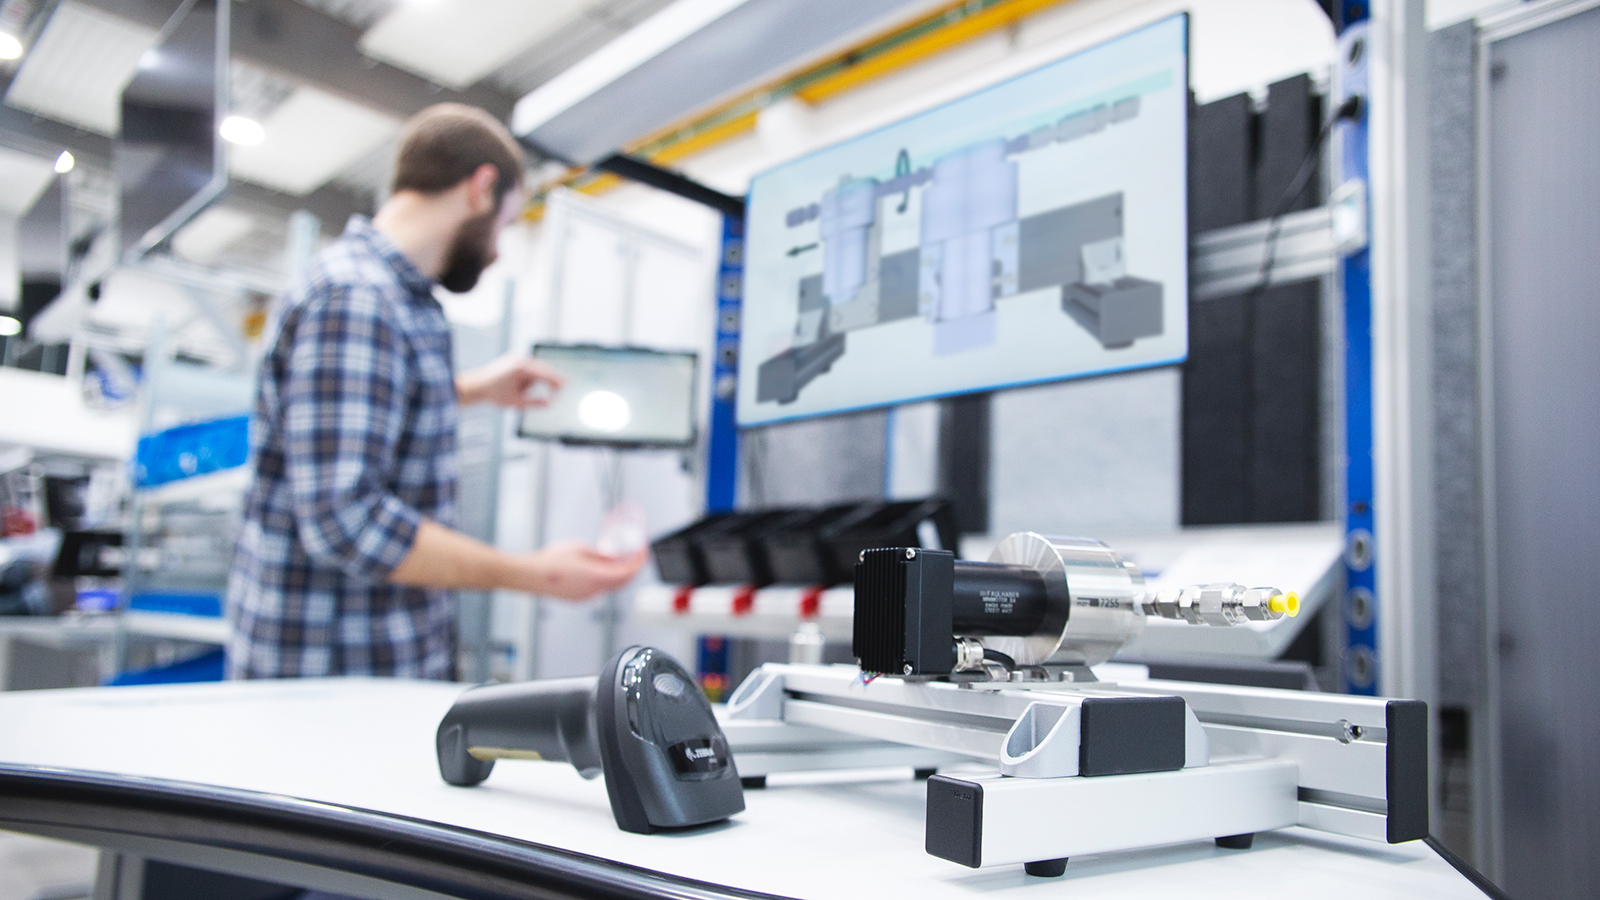 Digital twin: the digital twin helps technical support staff solve problems.